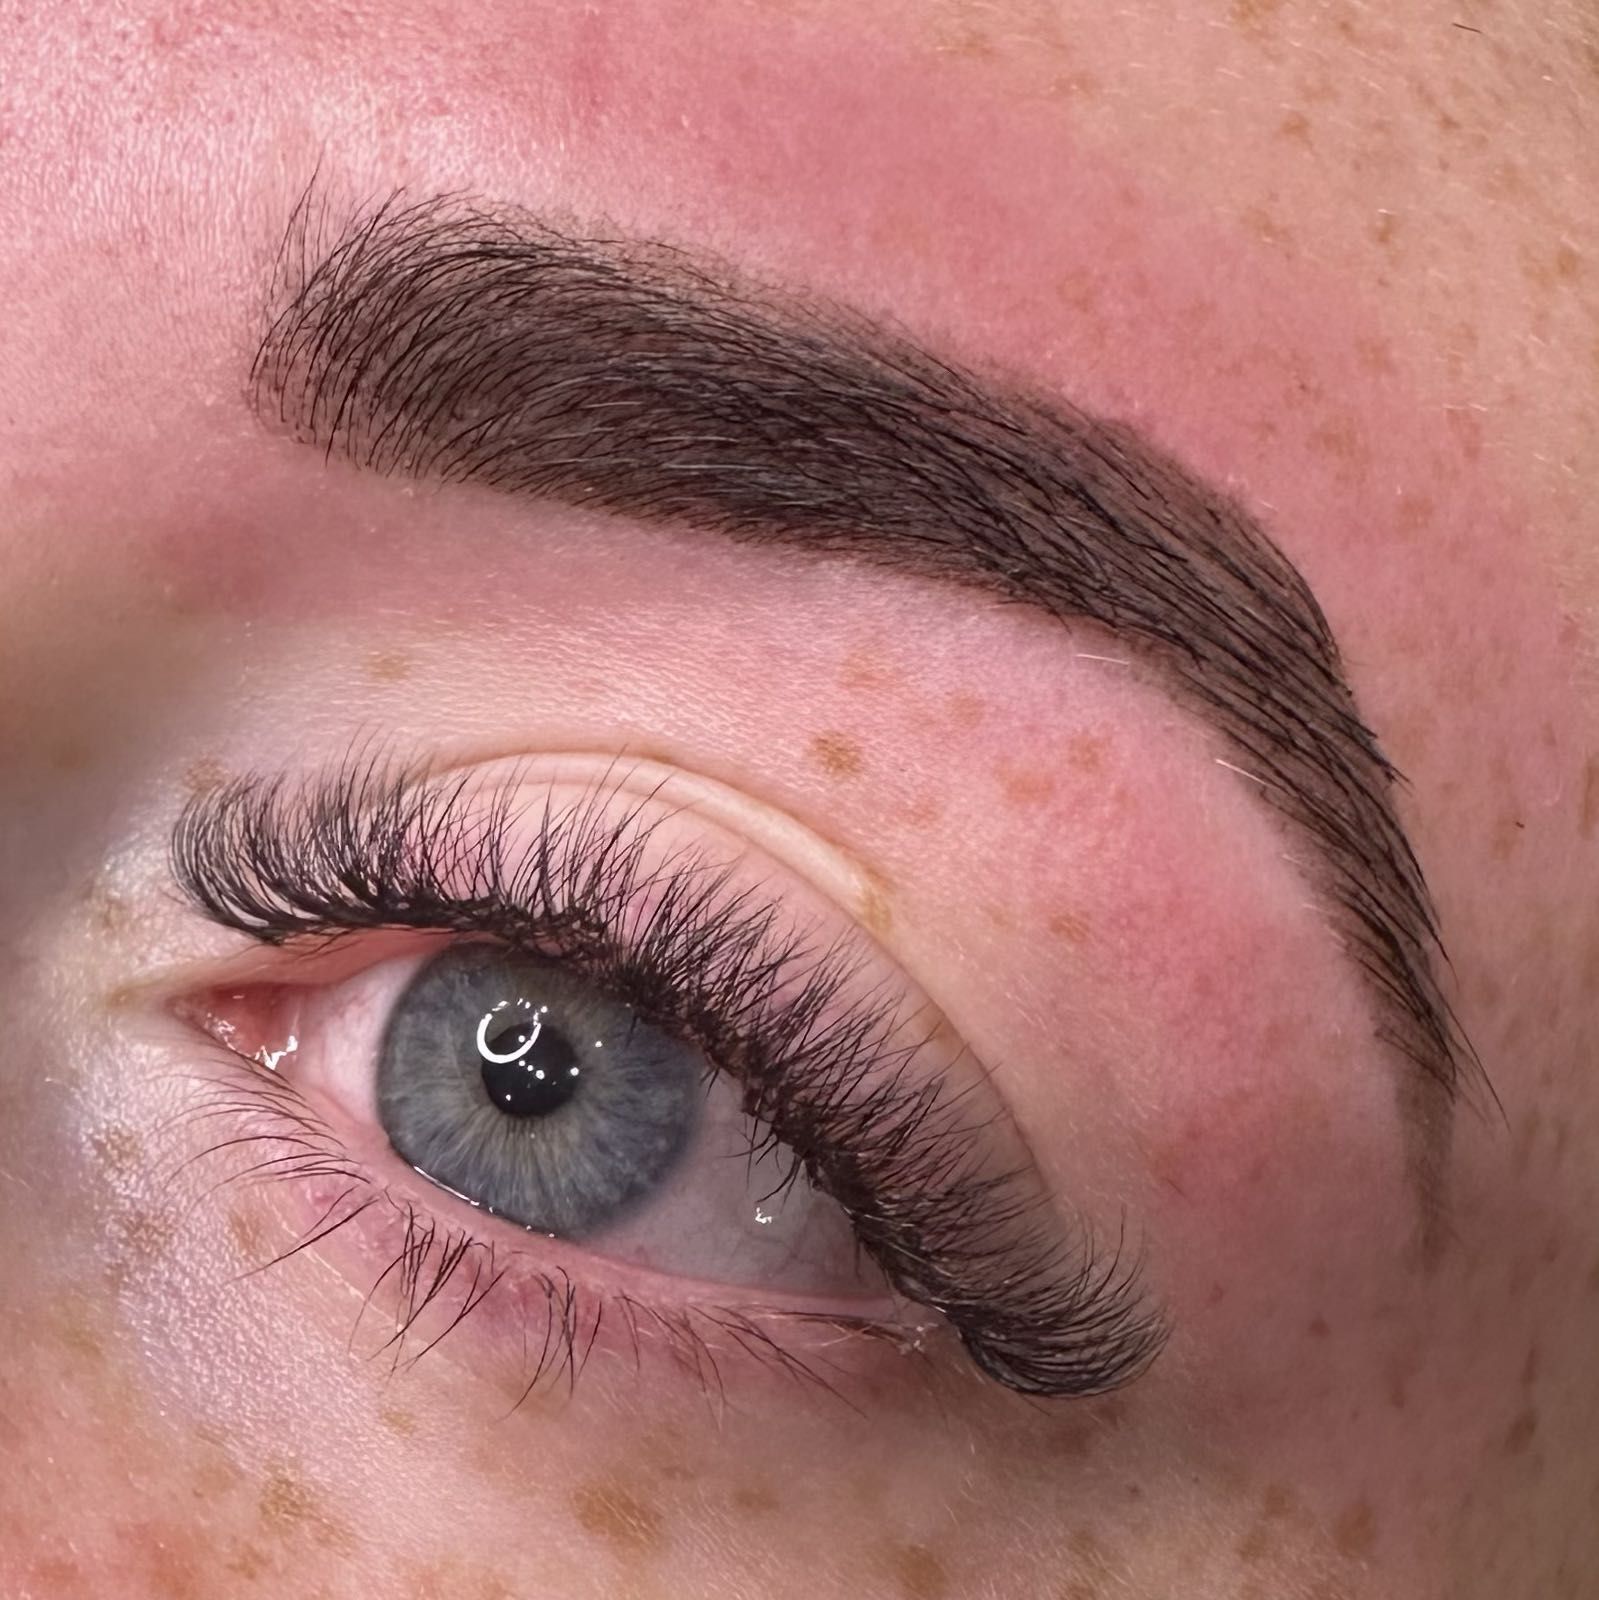 Russian fullset with a brow wax and tint portfolio